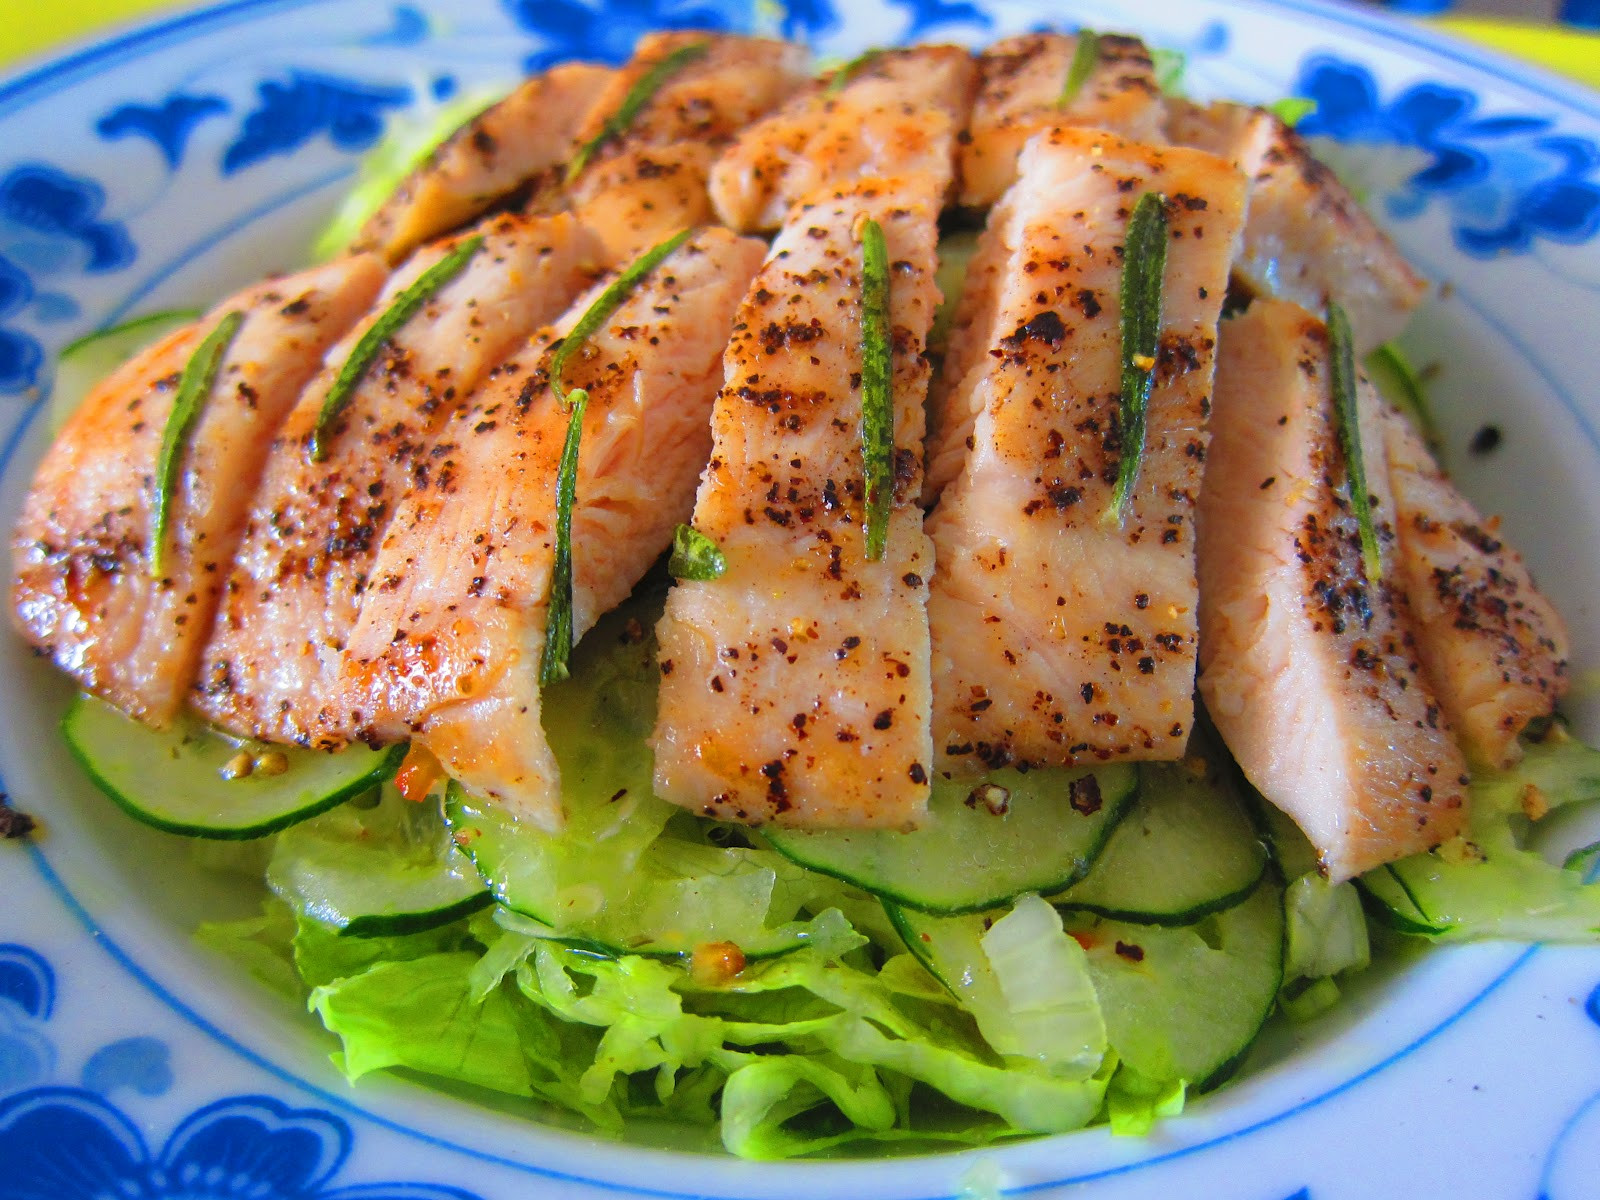 Chicken Breast For Salad
 PapaCheong s 拿手好菜 Grilled Chicken Breast Salad